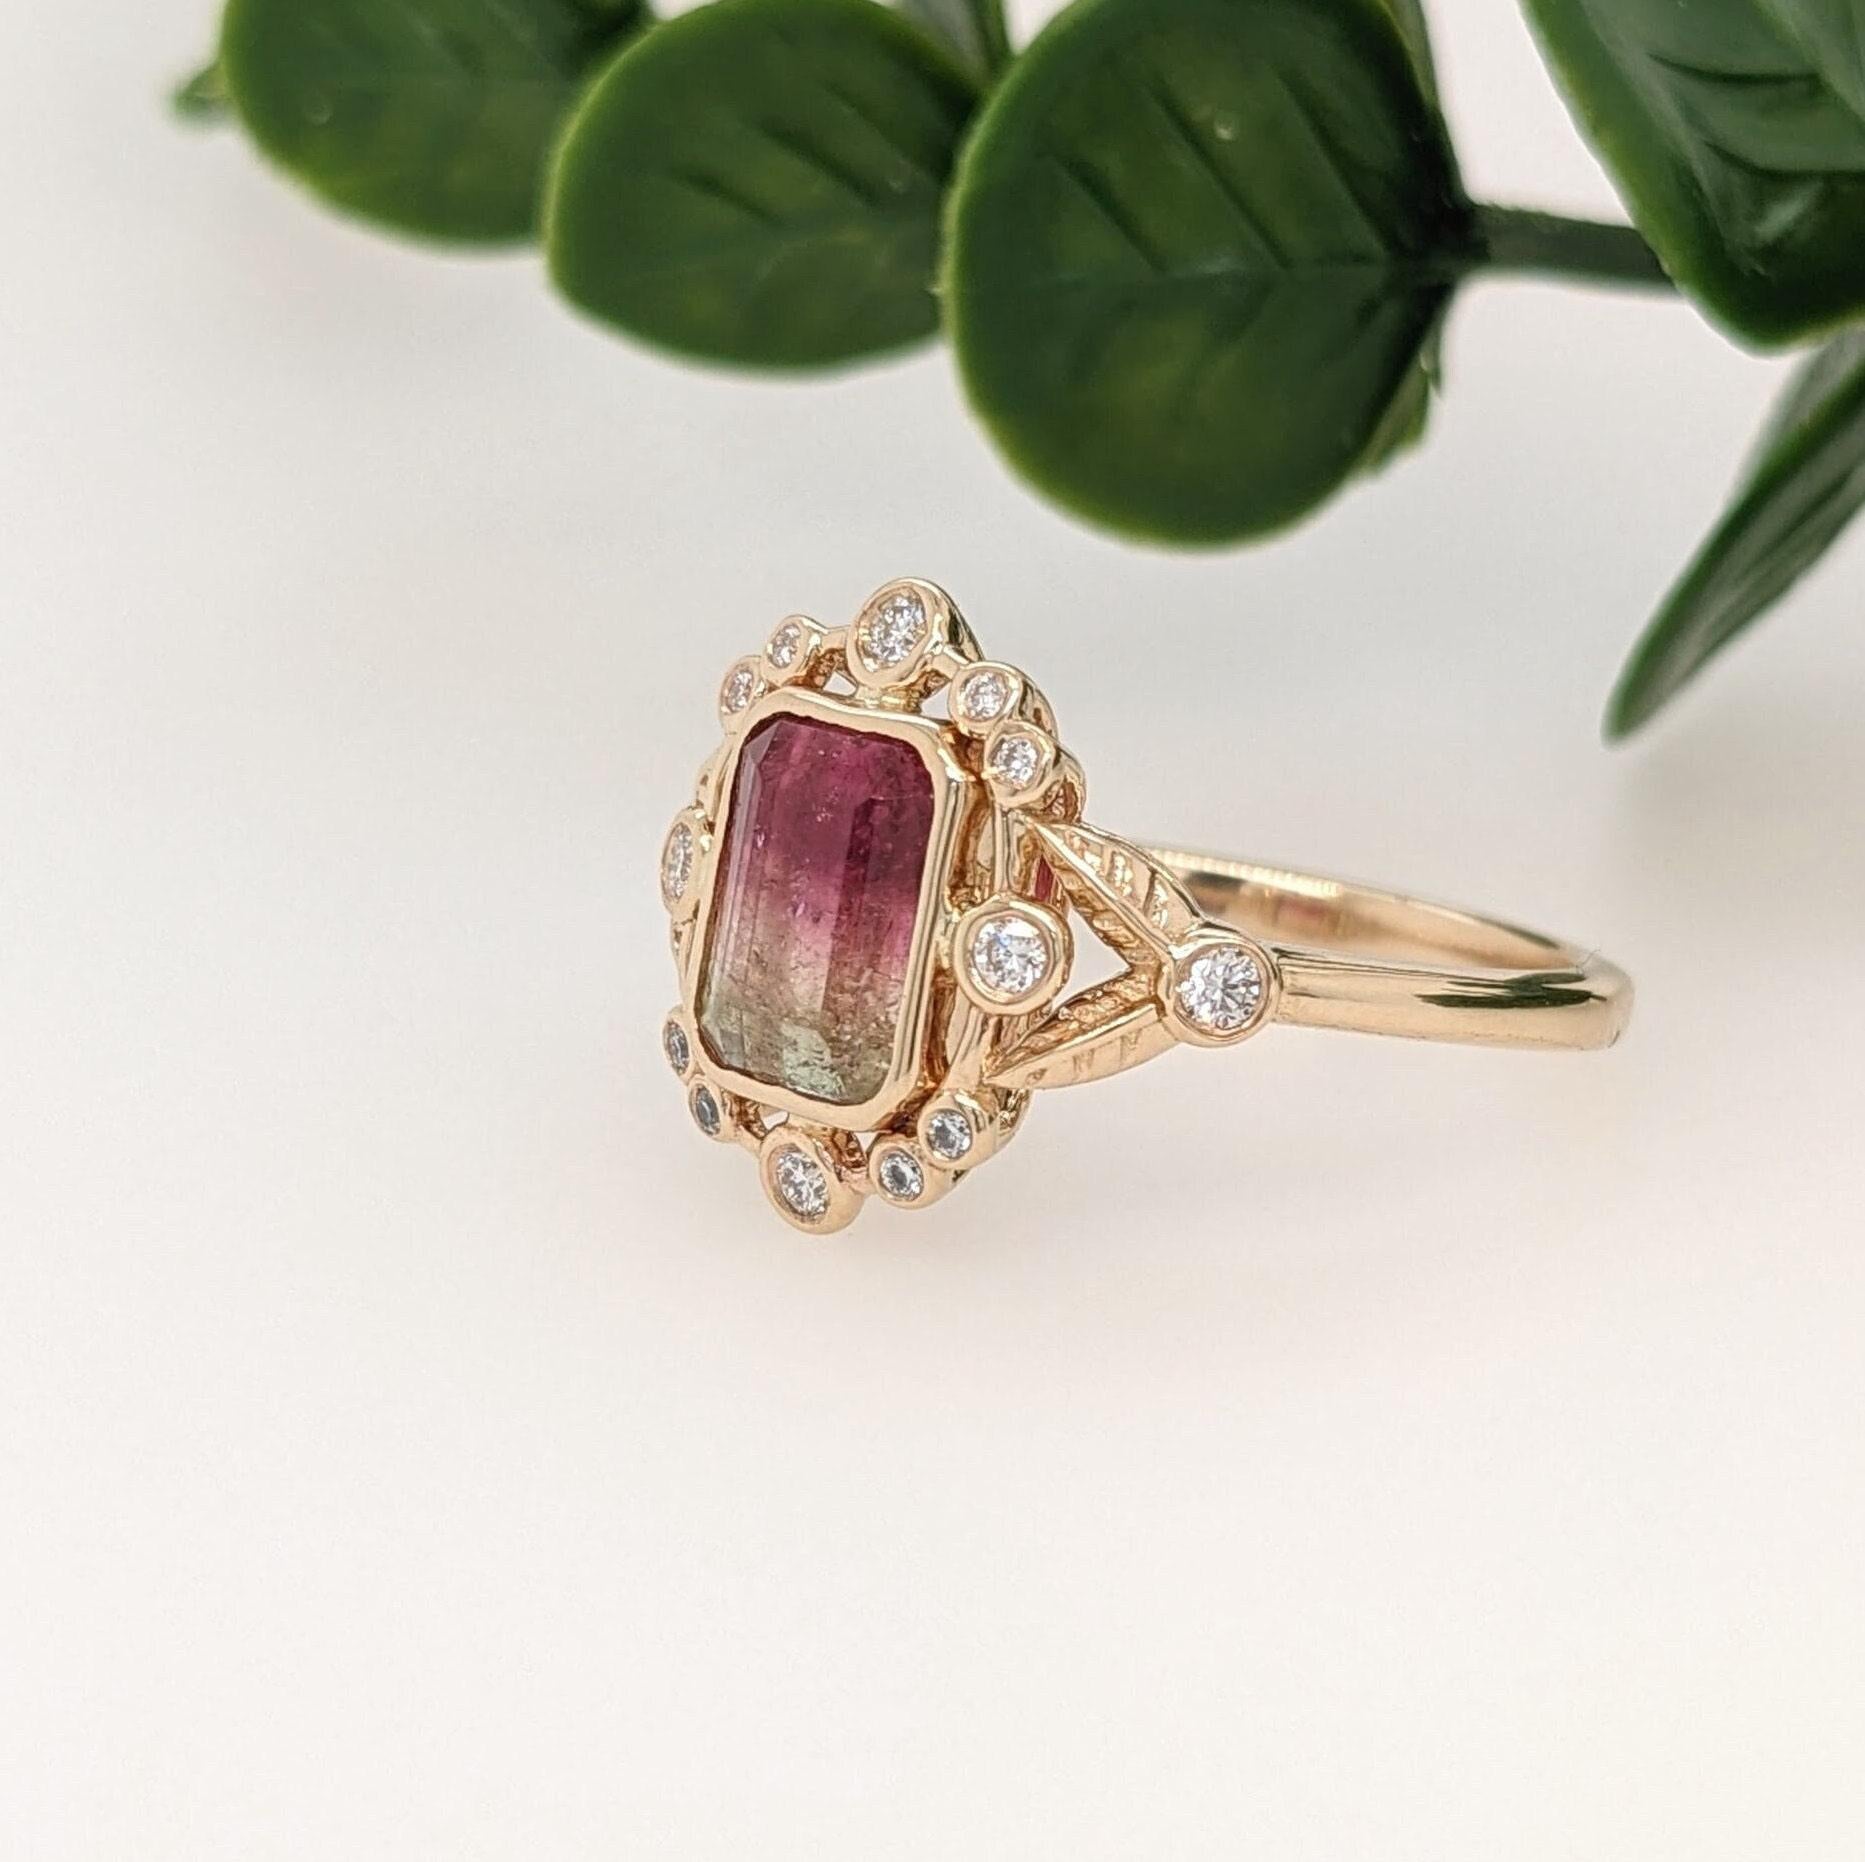 2ct Watermelon Tourmaline Ring w Earth Mined Diamonds in Solid 14K Gold EM 8x6mm In New Condition For Sale In Columbus, OH